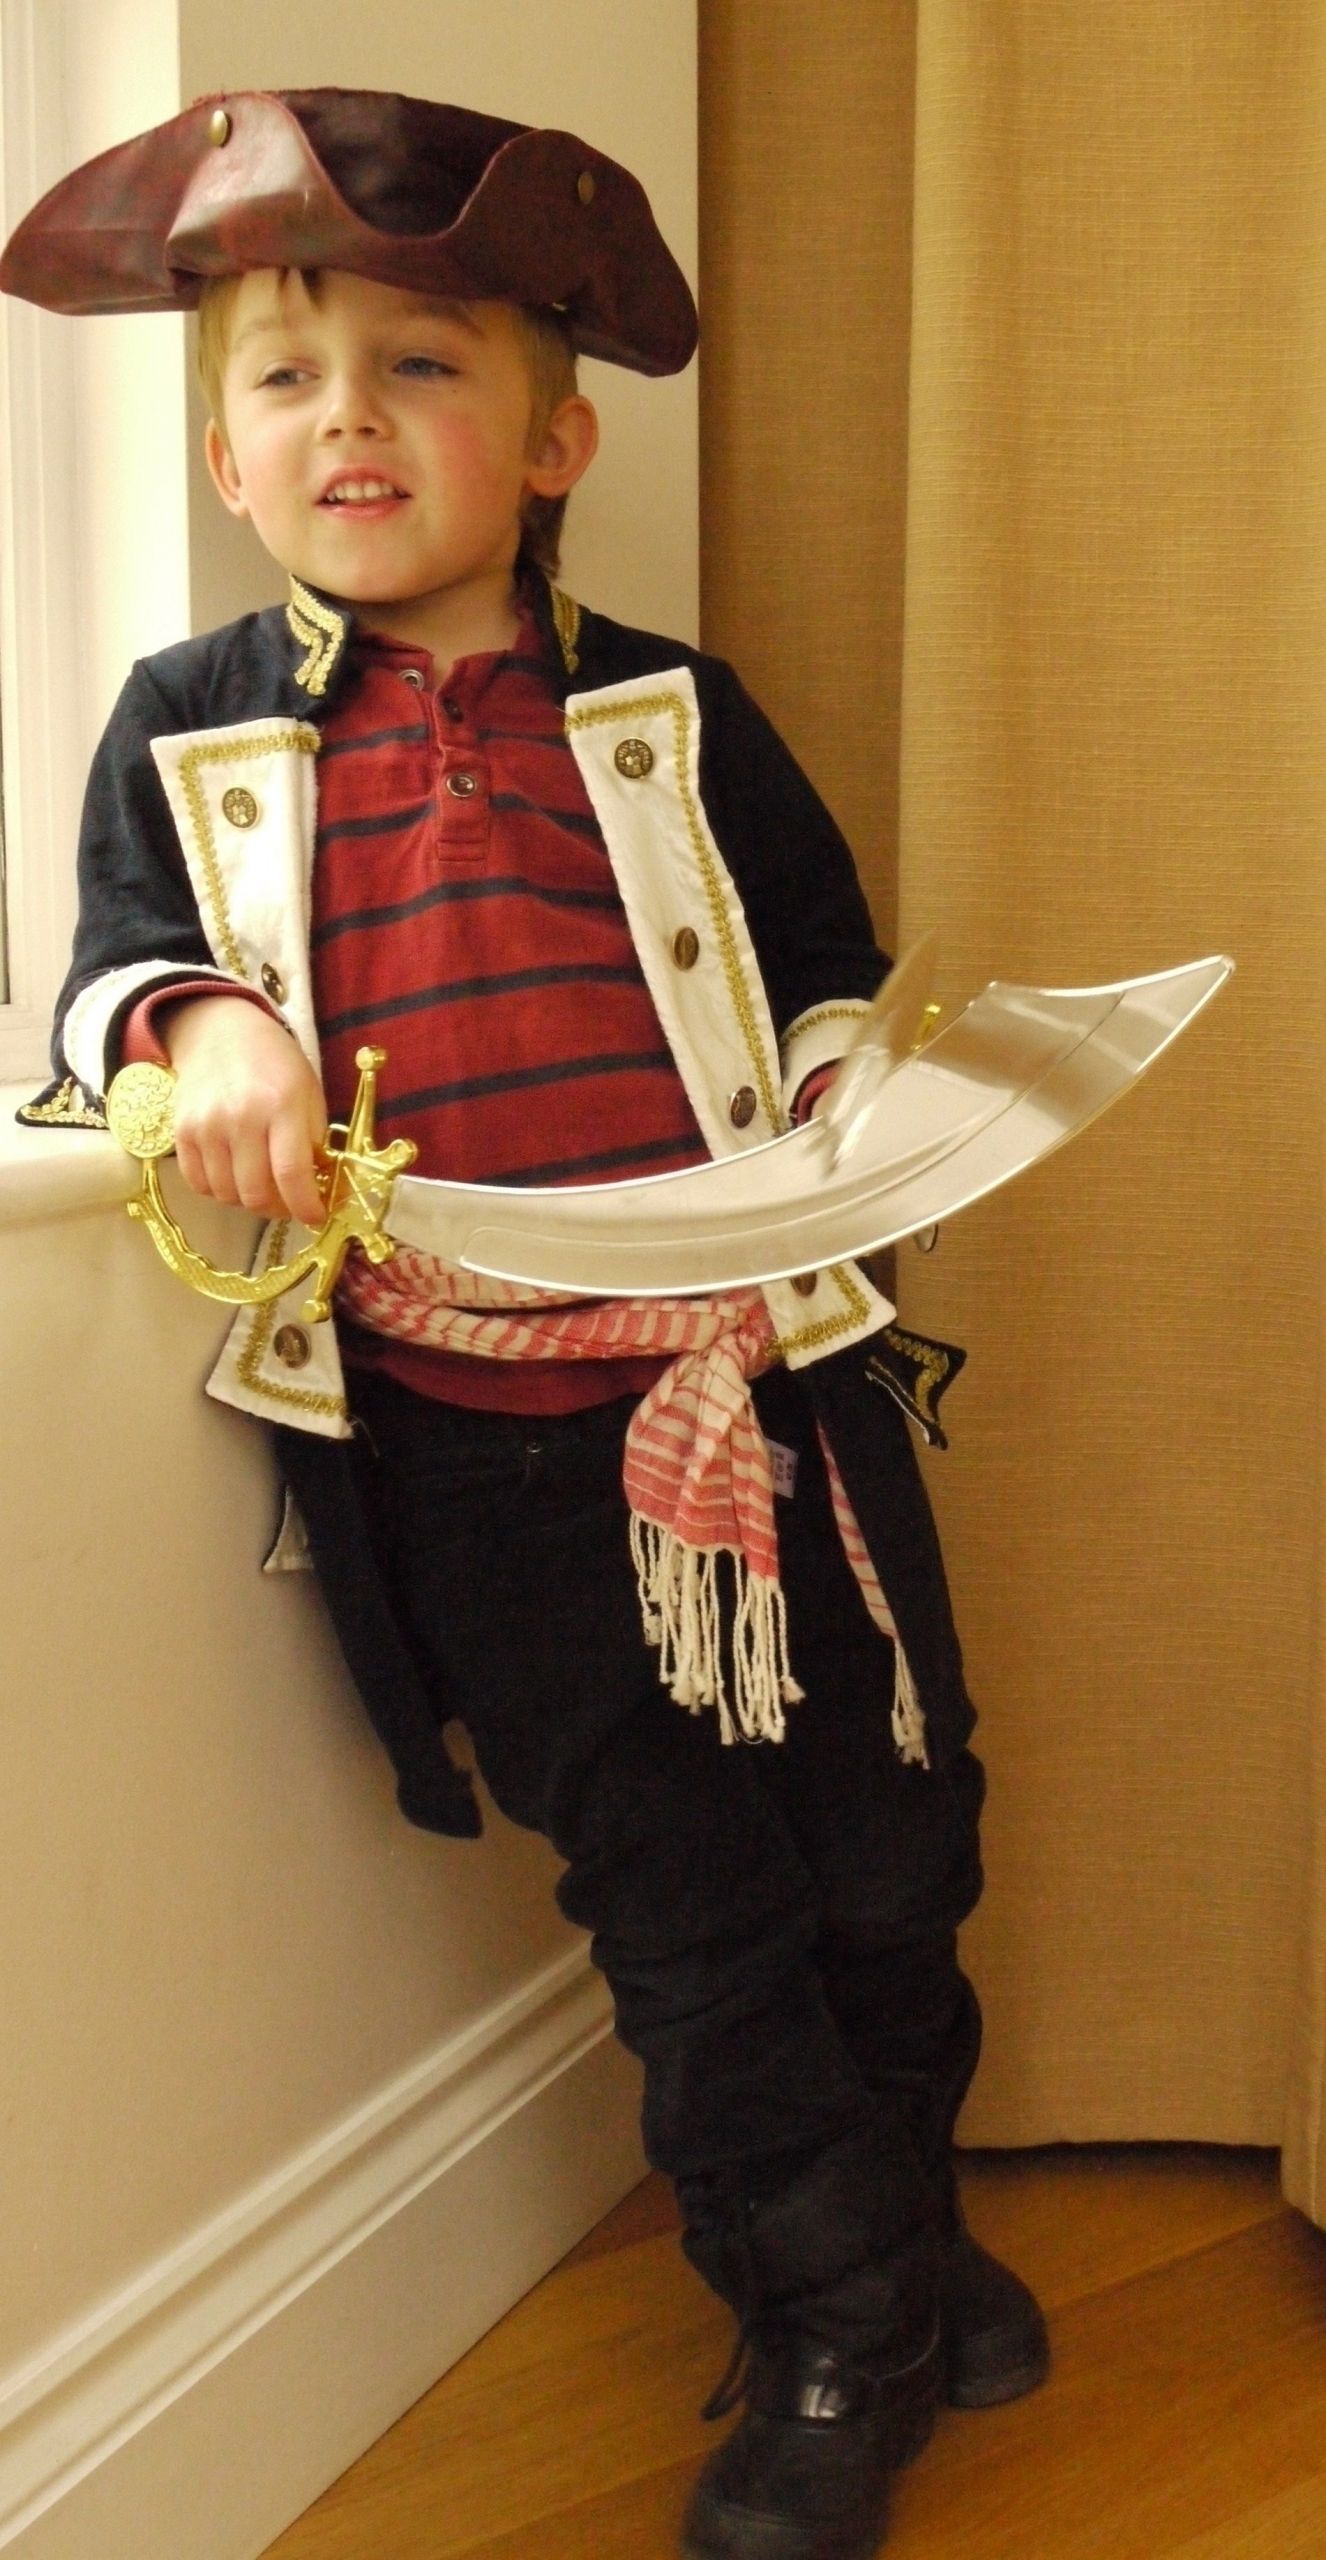 DIY Pirate Costume Kids
 10 Attractive Homemade Pirate Costume Ideas For Kids 2019